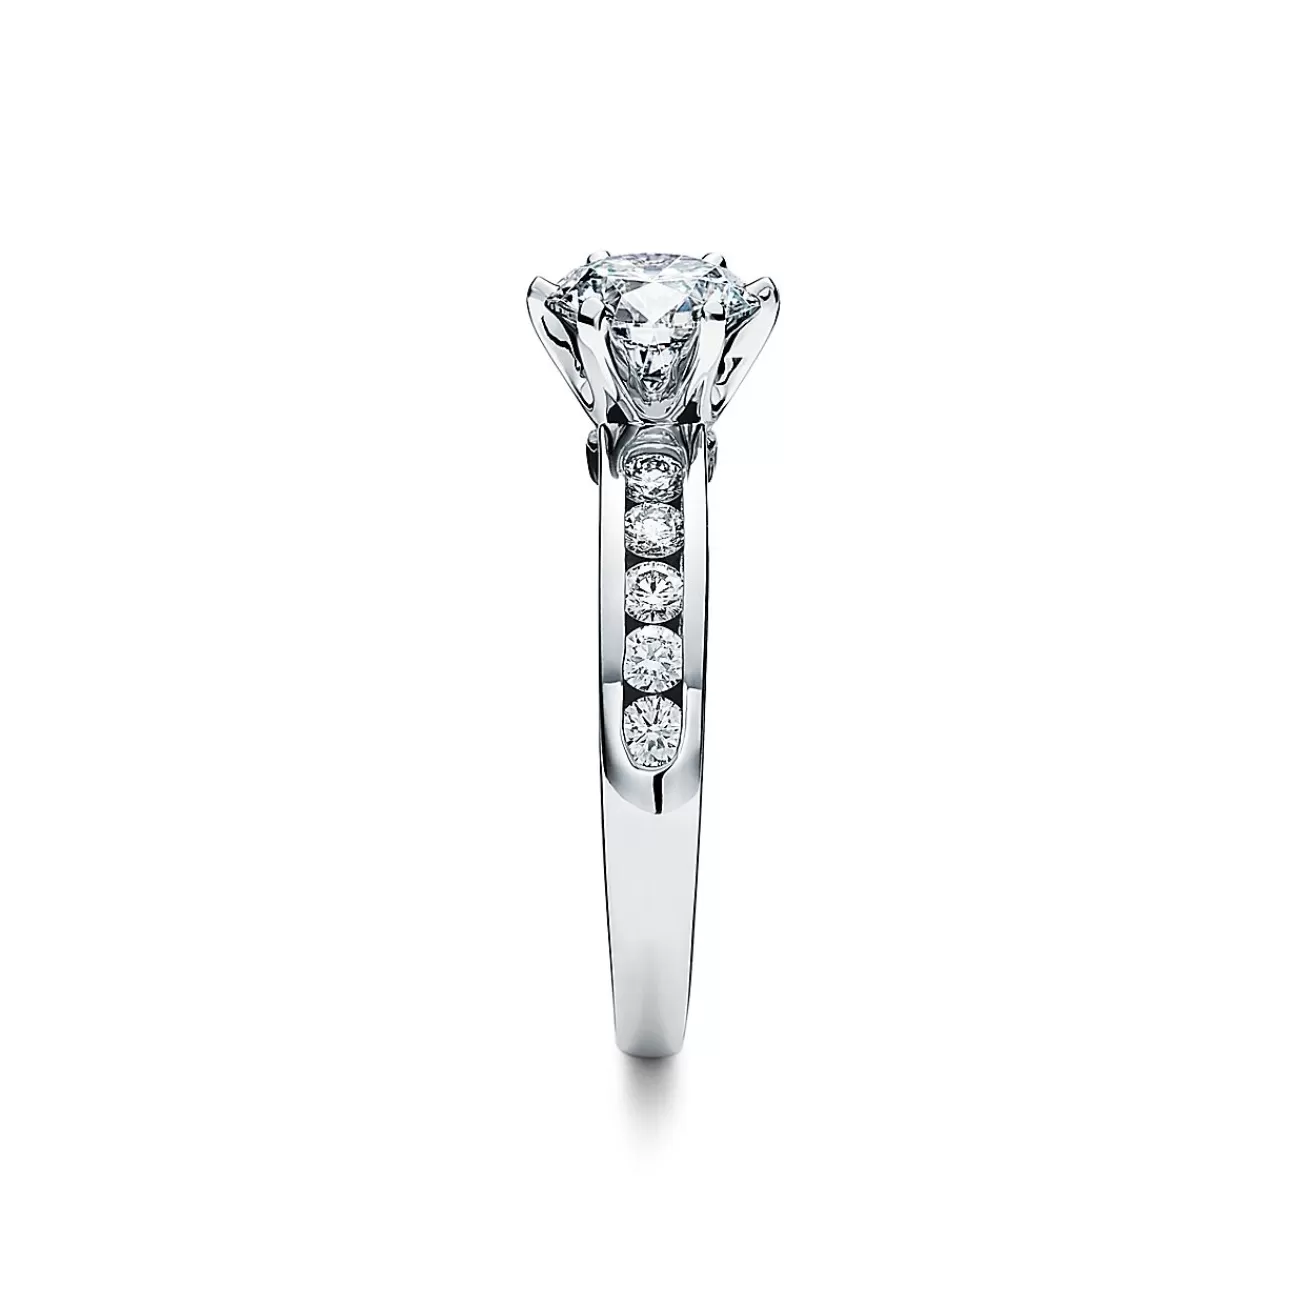 Tiffany & Co. The Tiffany® Setting with a diamond band: world's most iconic engagement ring. | ^ Engagement Rings